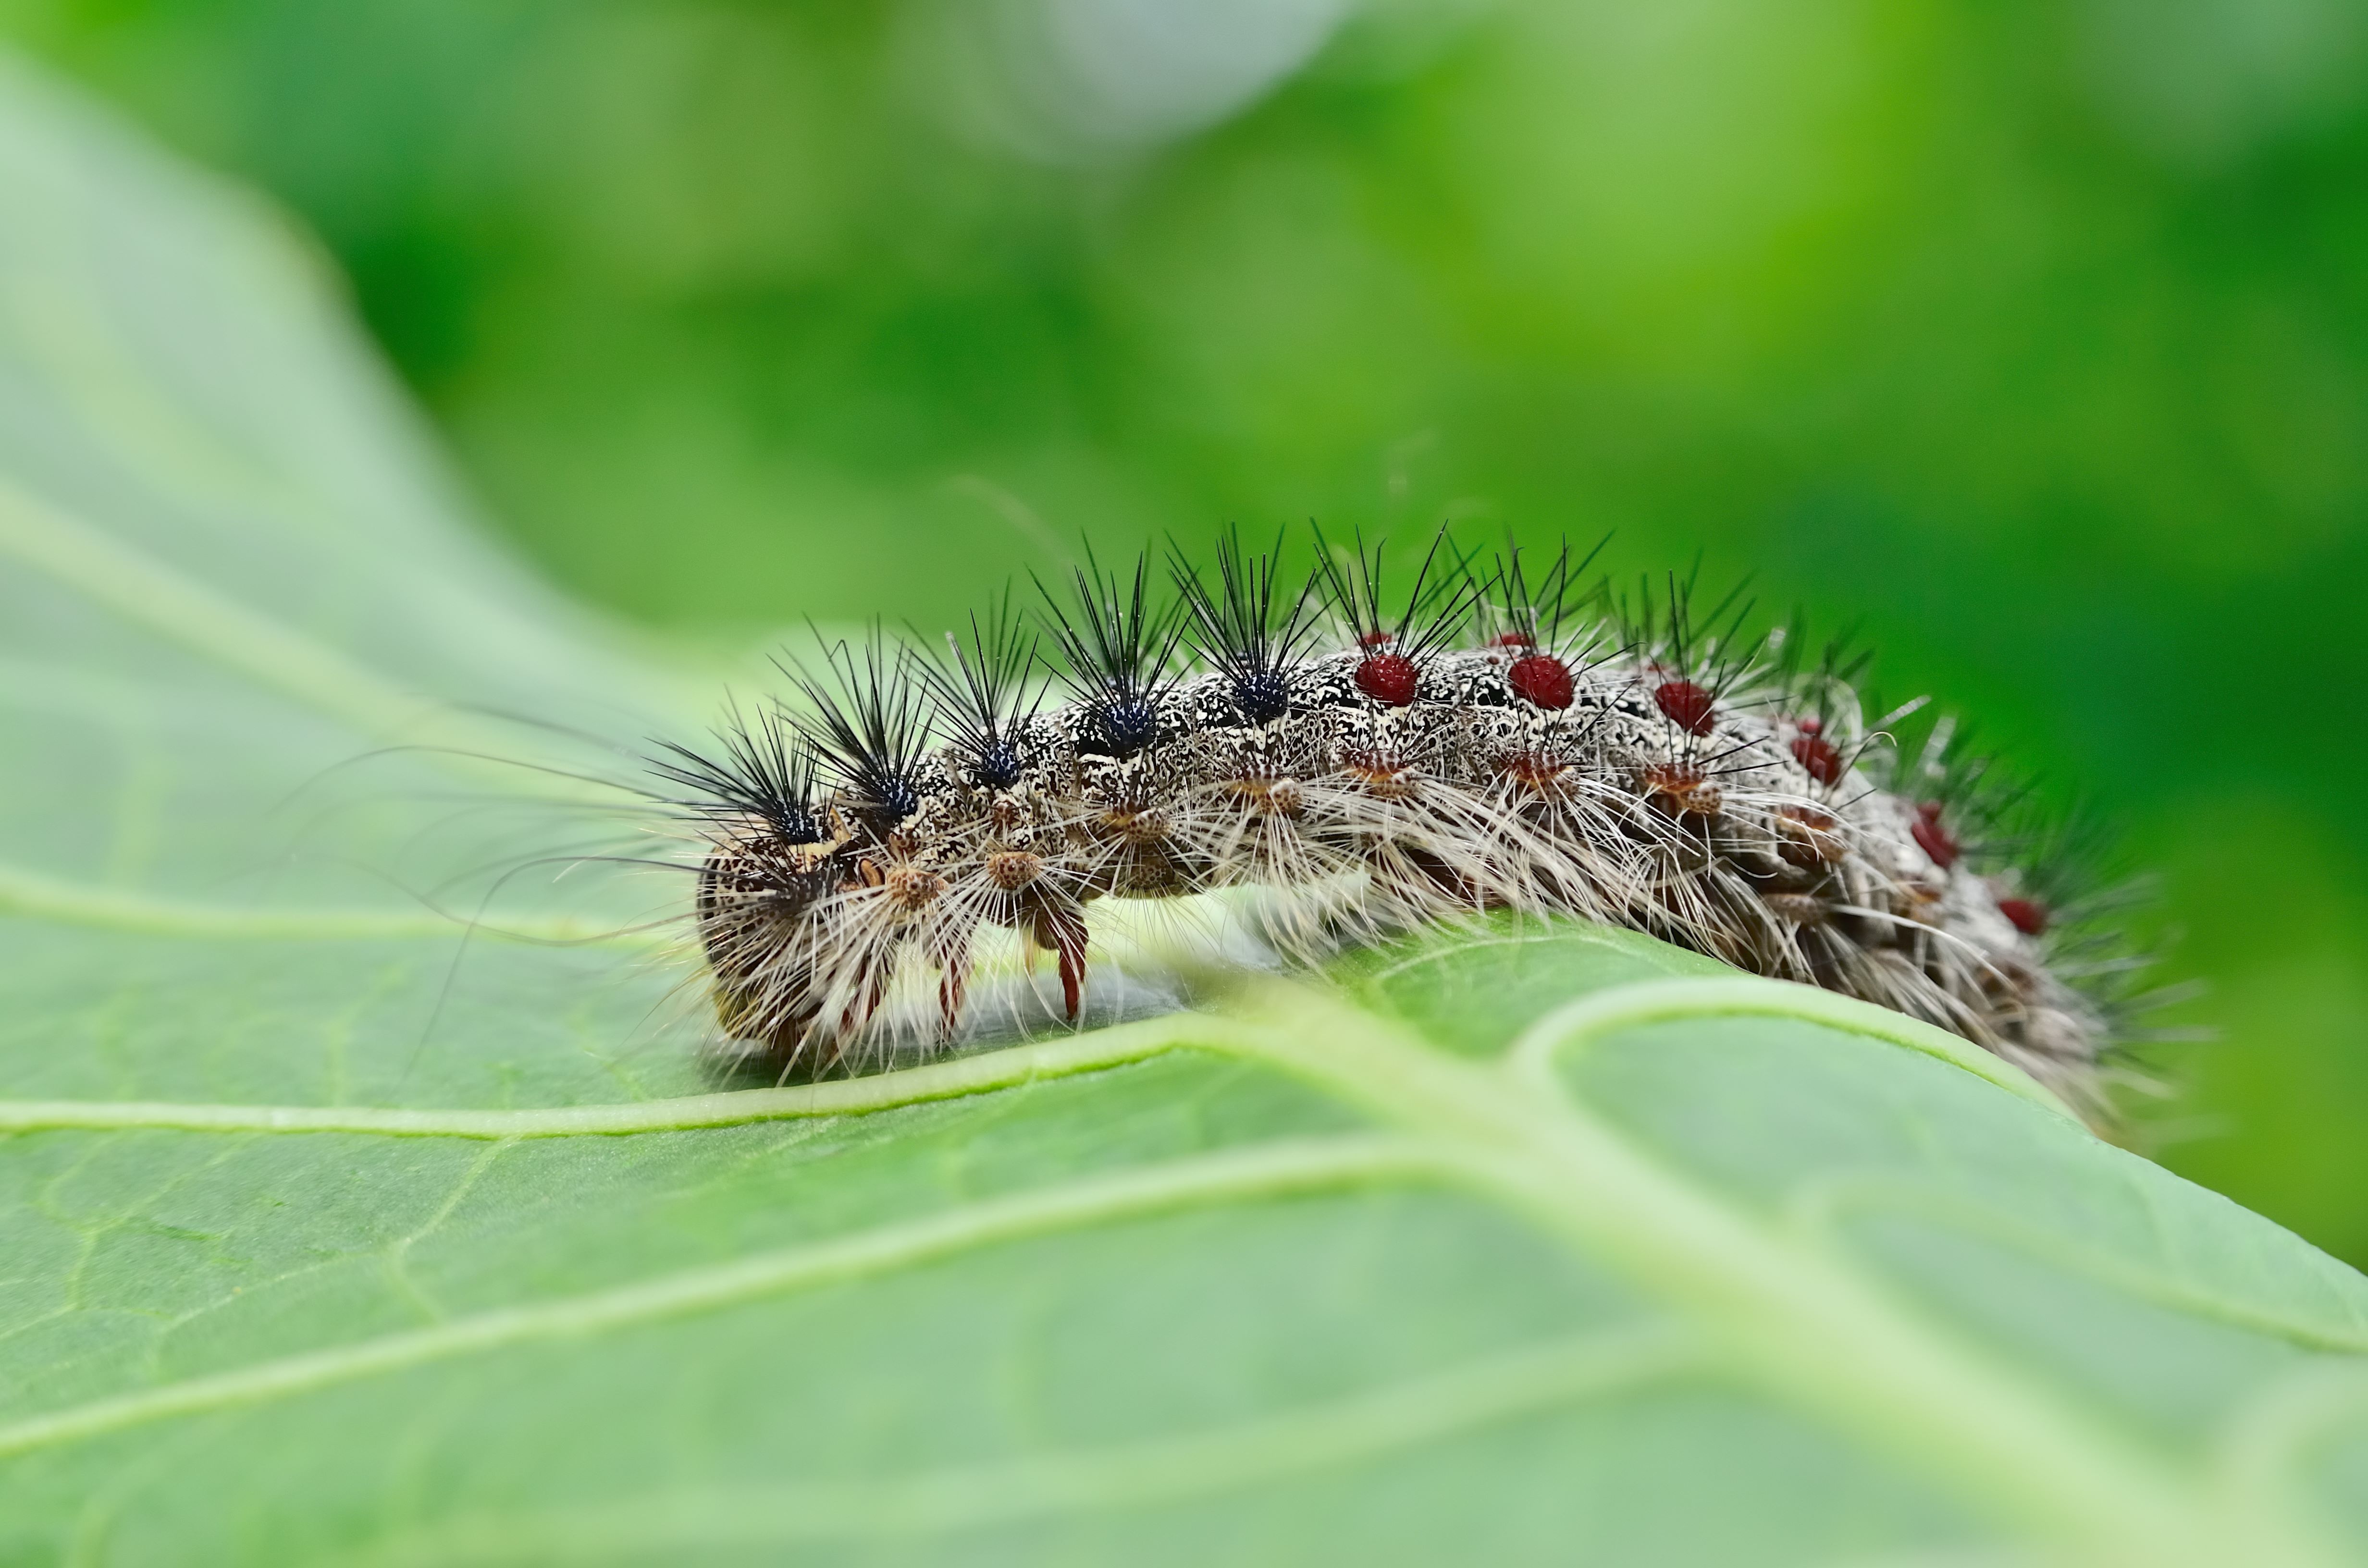 Gypsy moth spray: what is Btk and what if you have health concerns